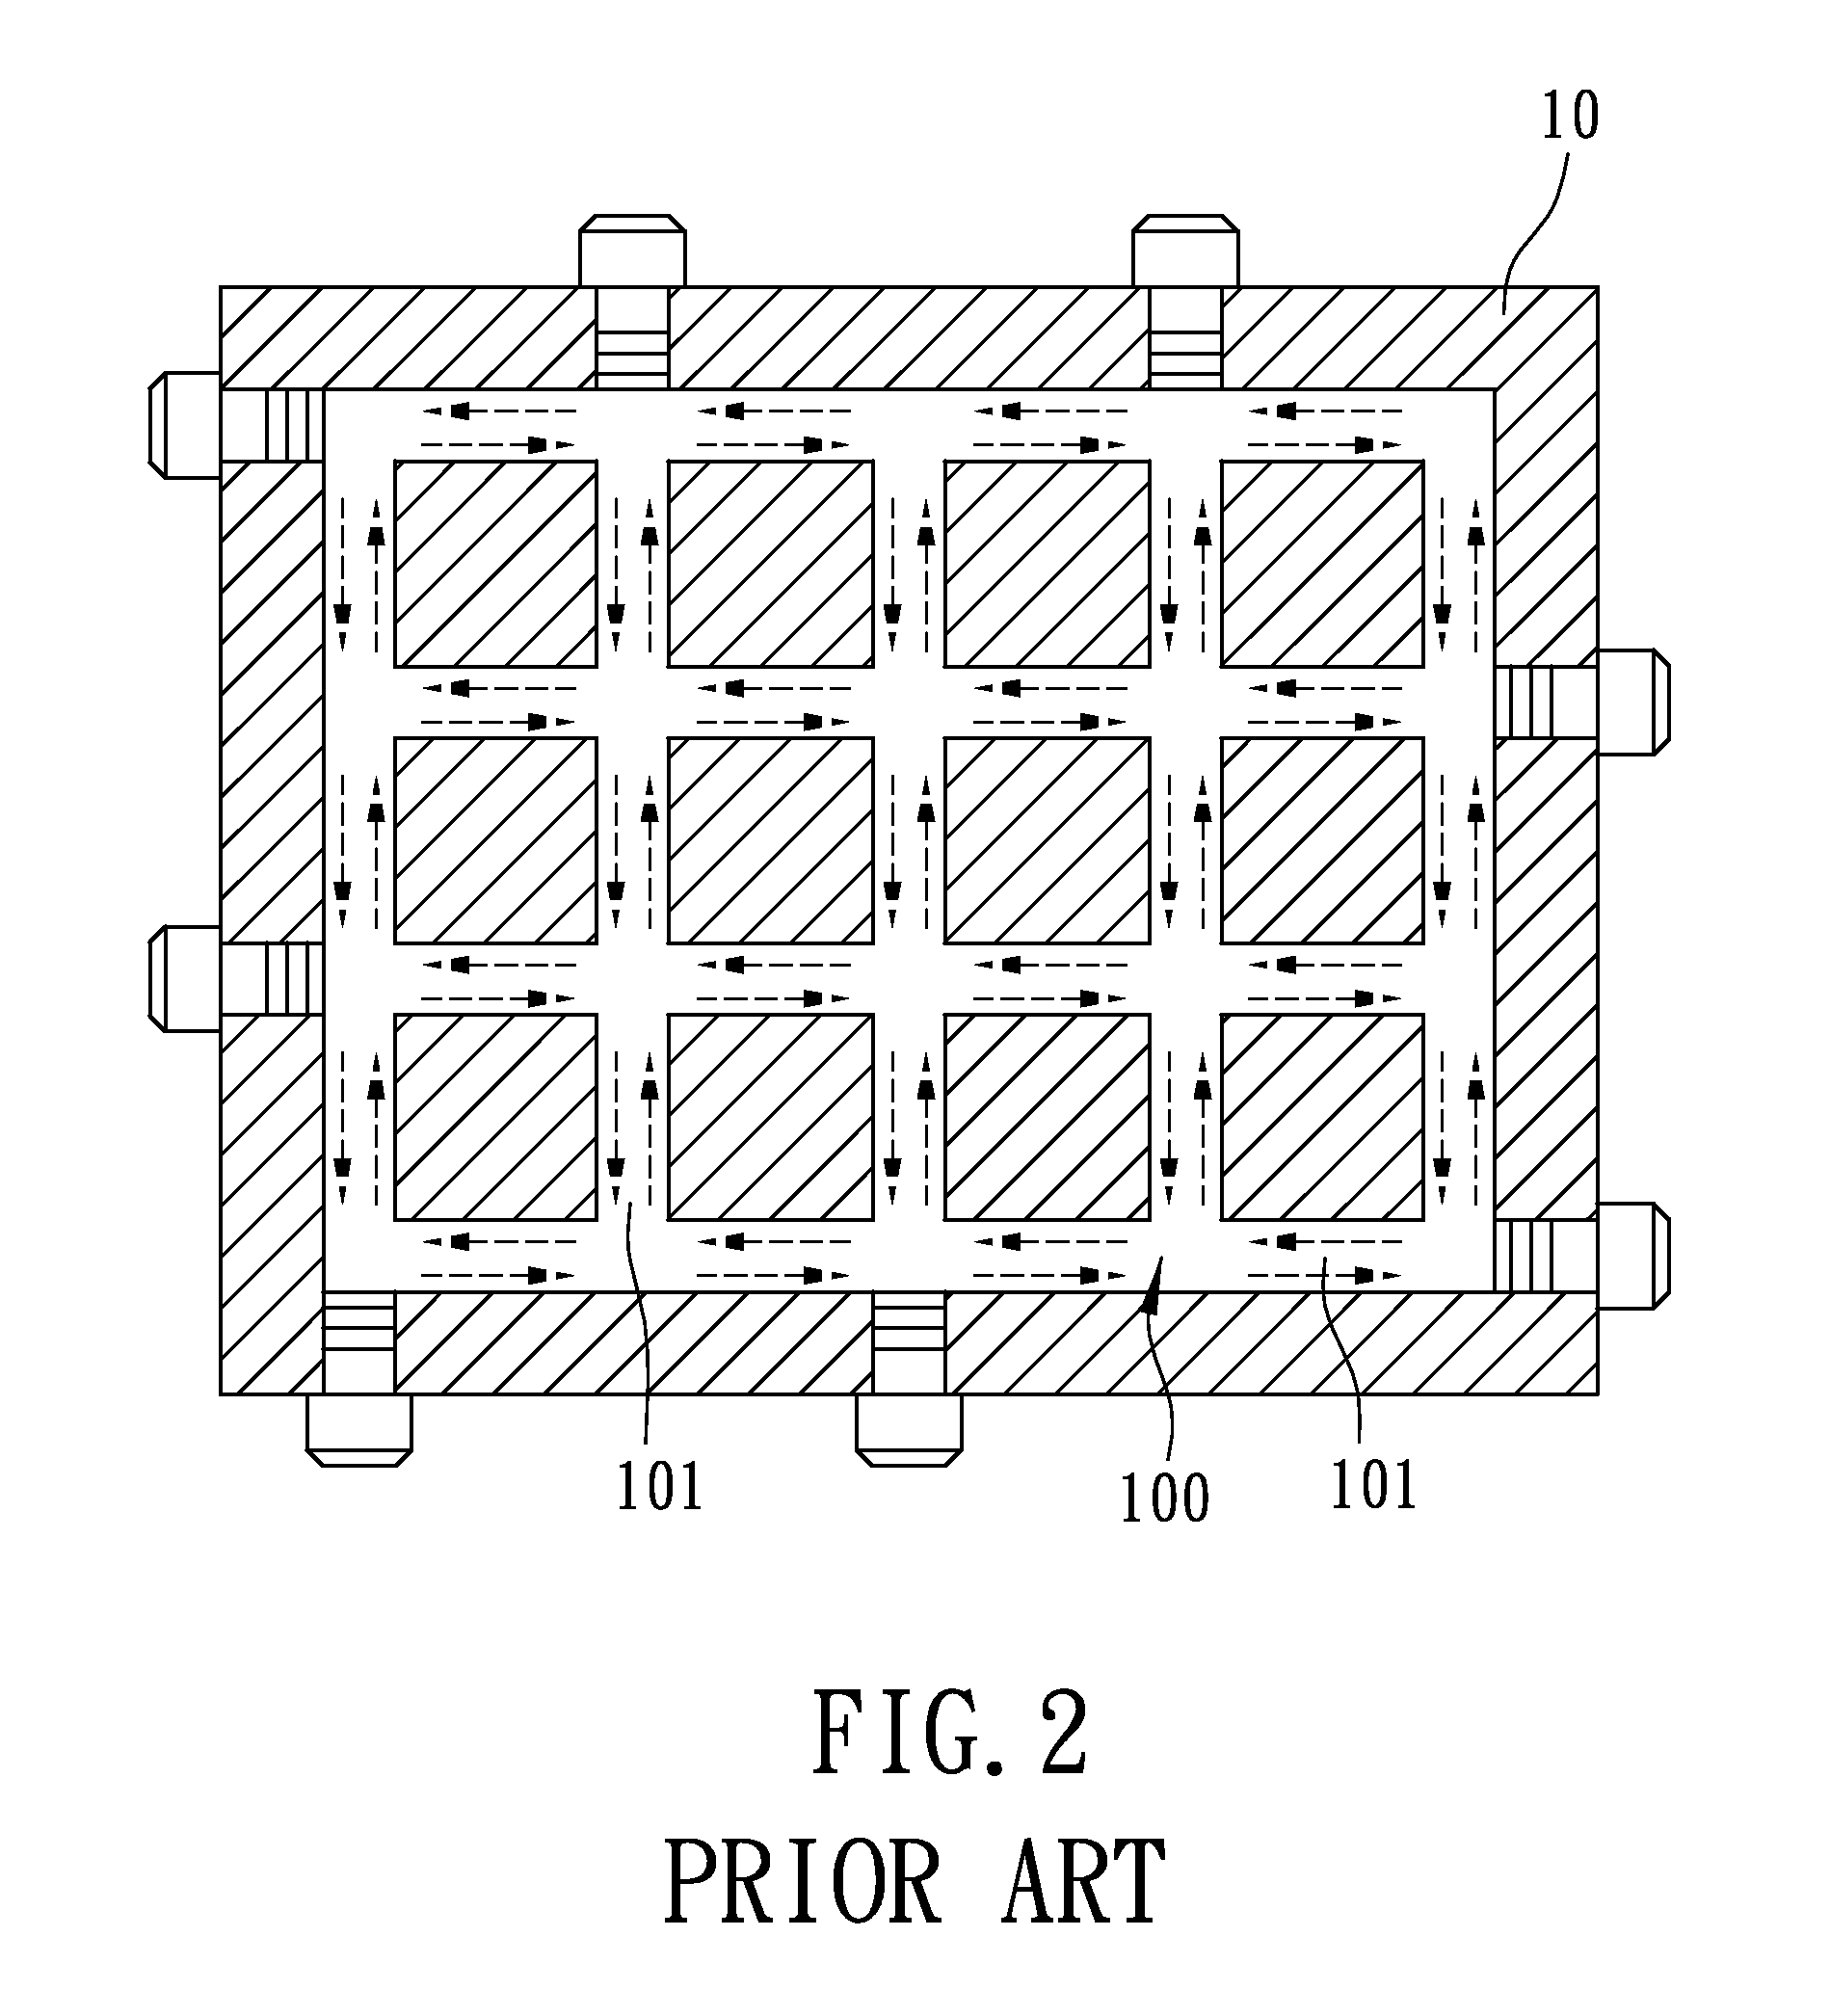 Heat Dissipating Device